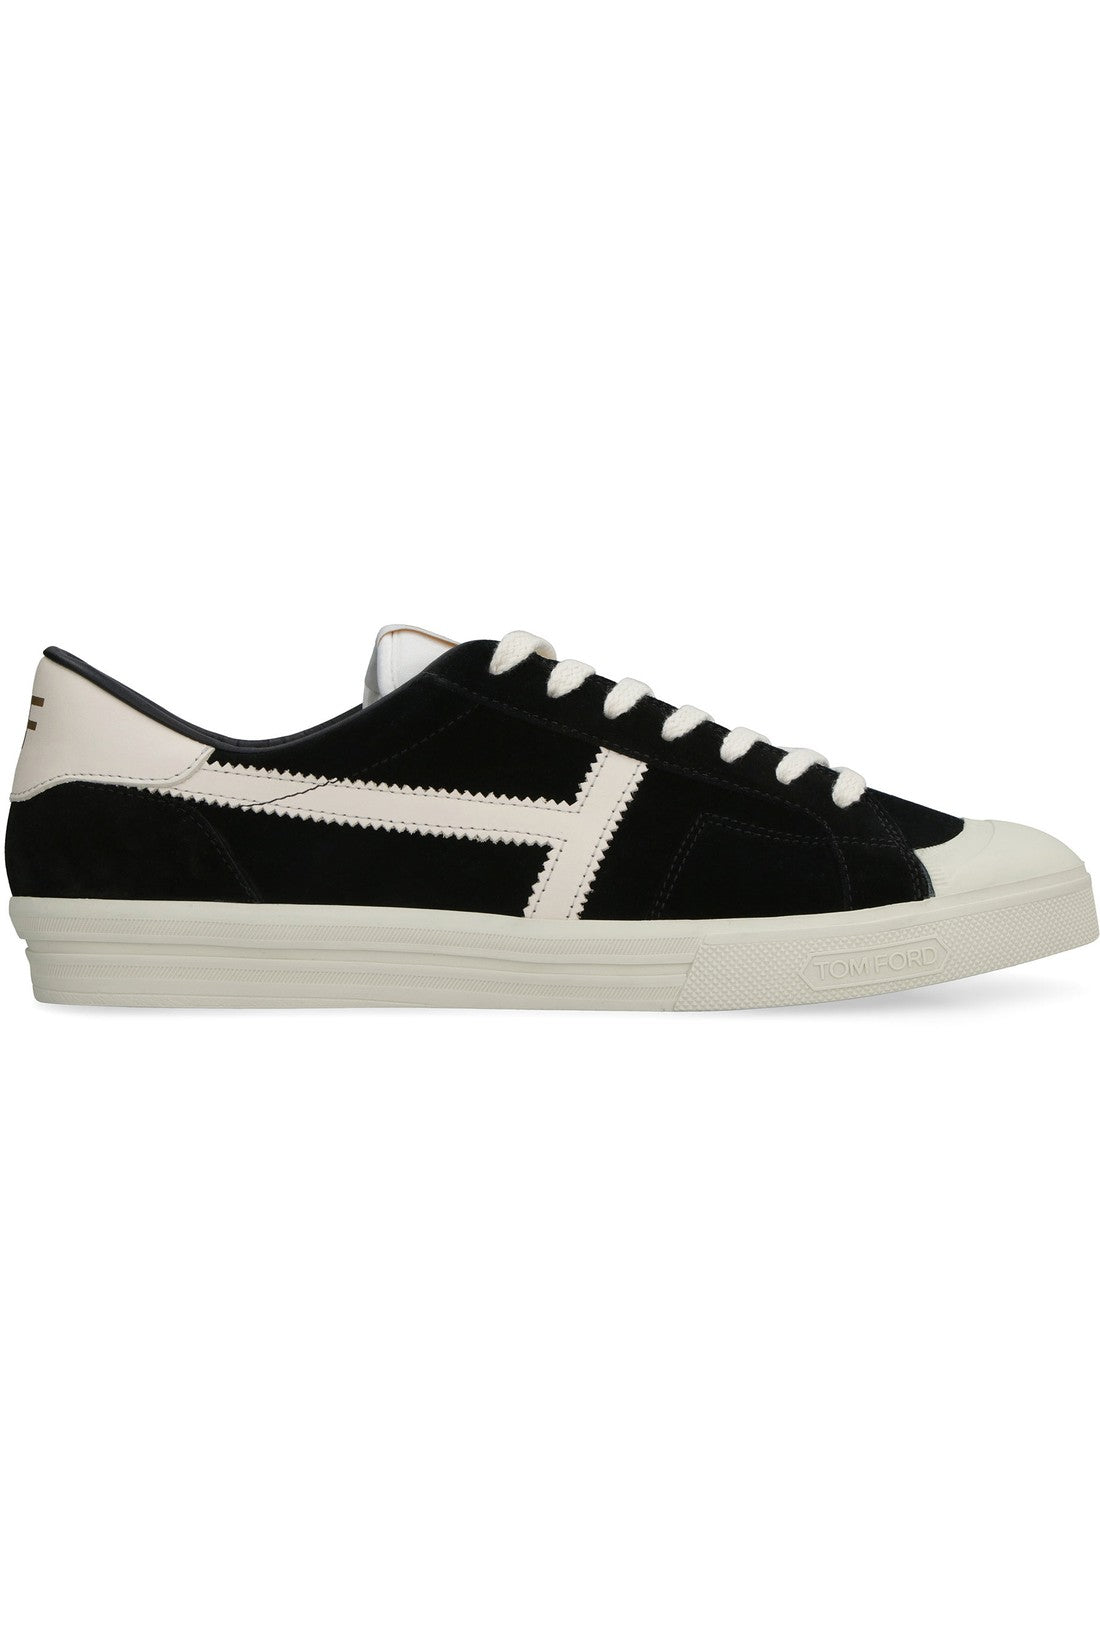 Tom Ford-OUTLET-SALE-Jarvis suede sneakers-ARCHIVIST